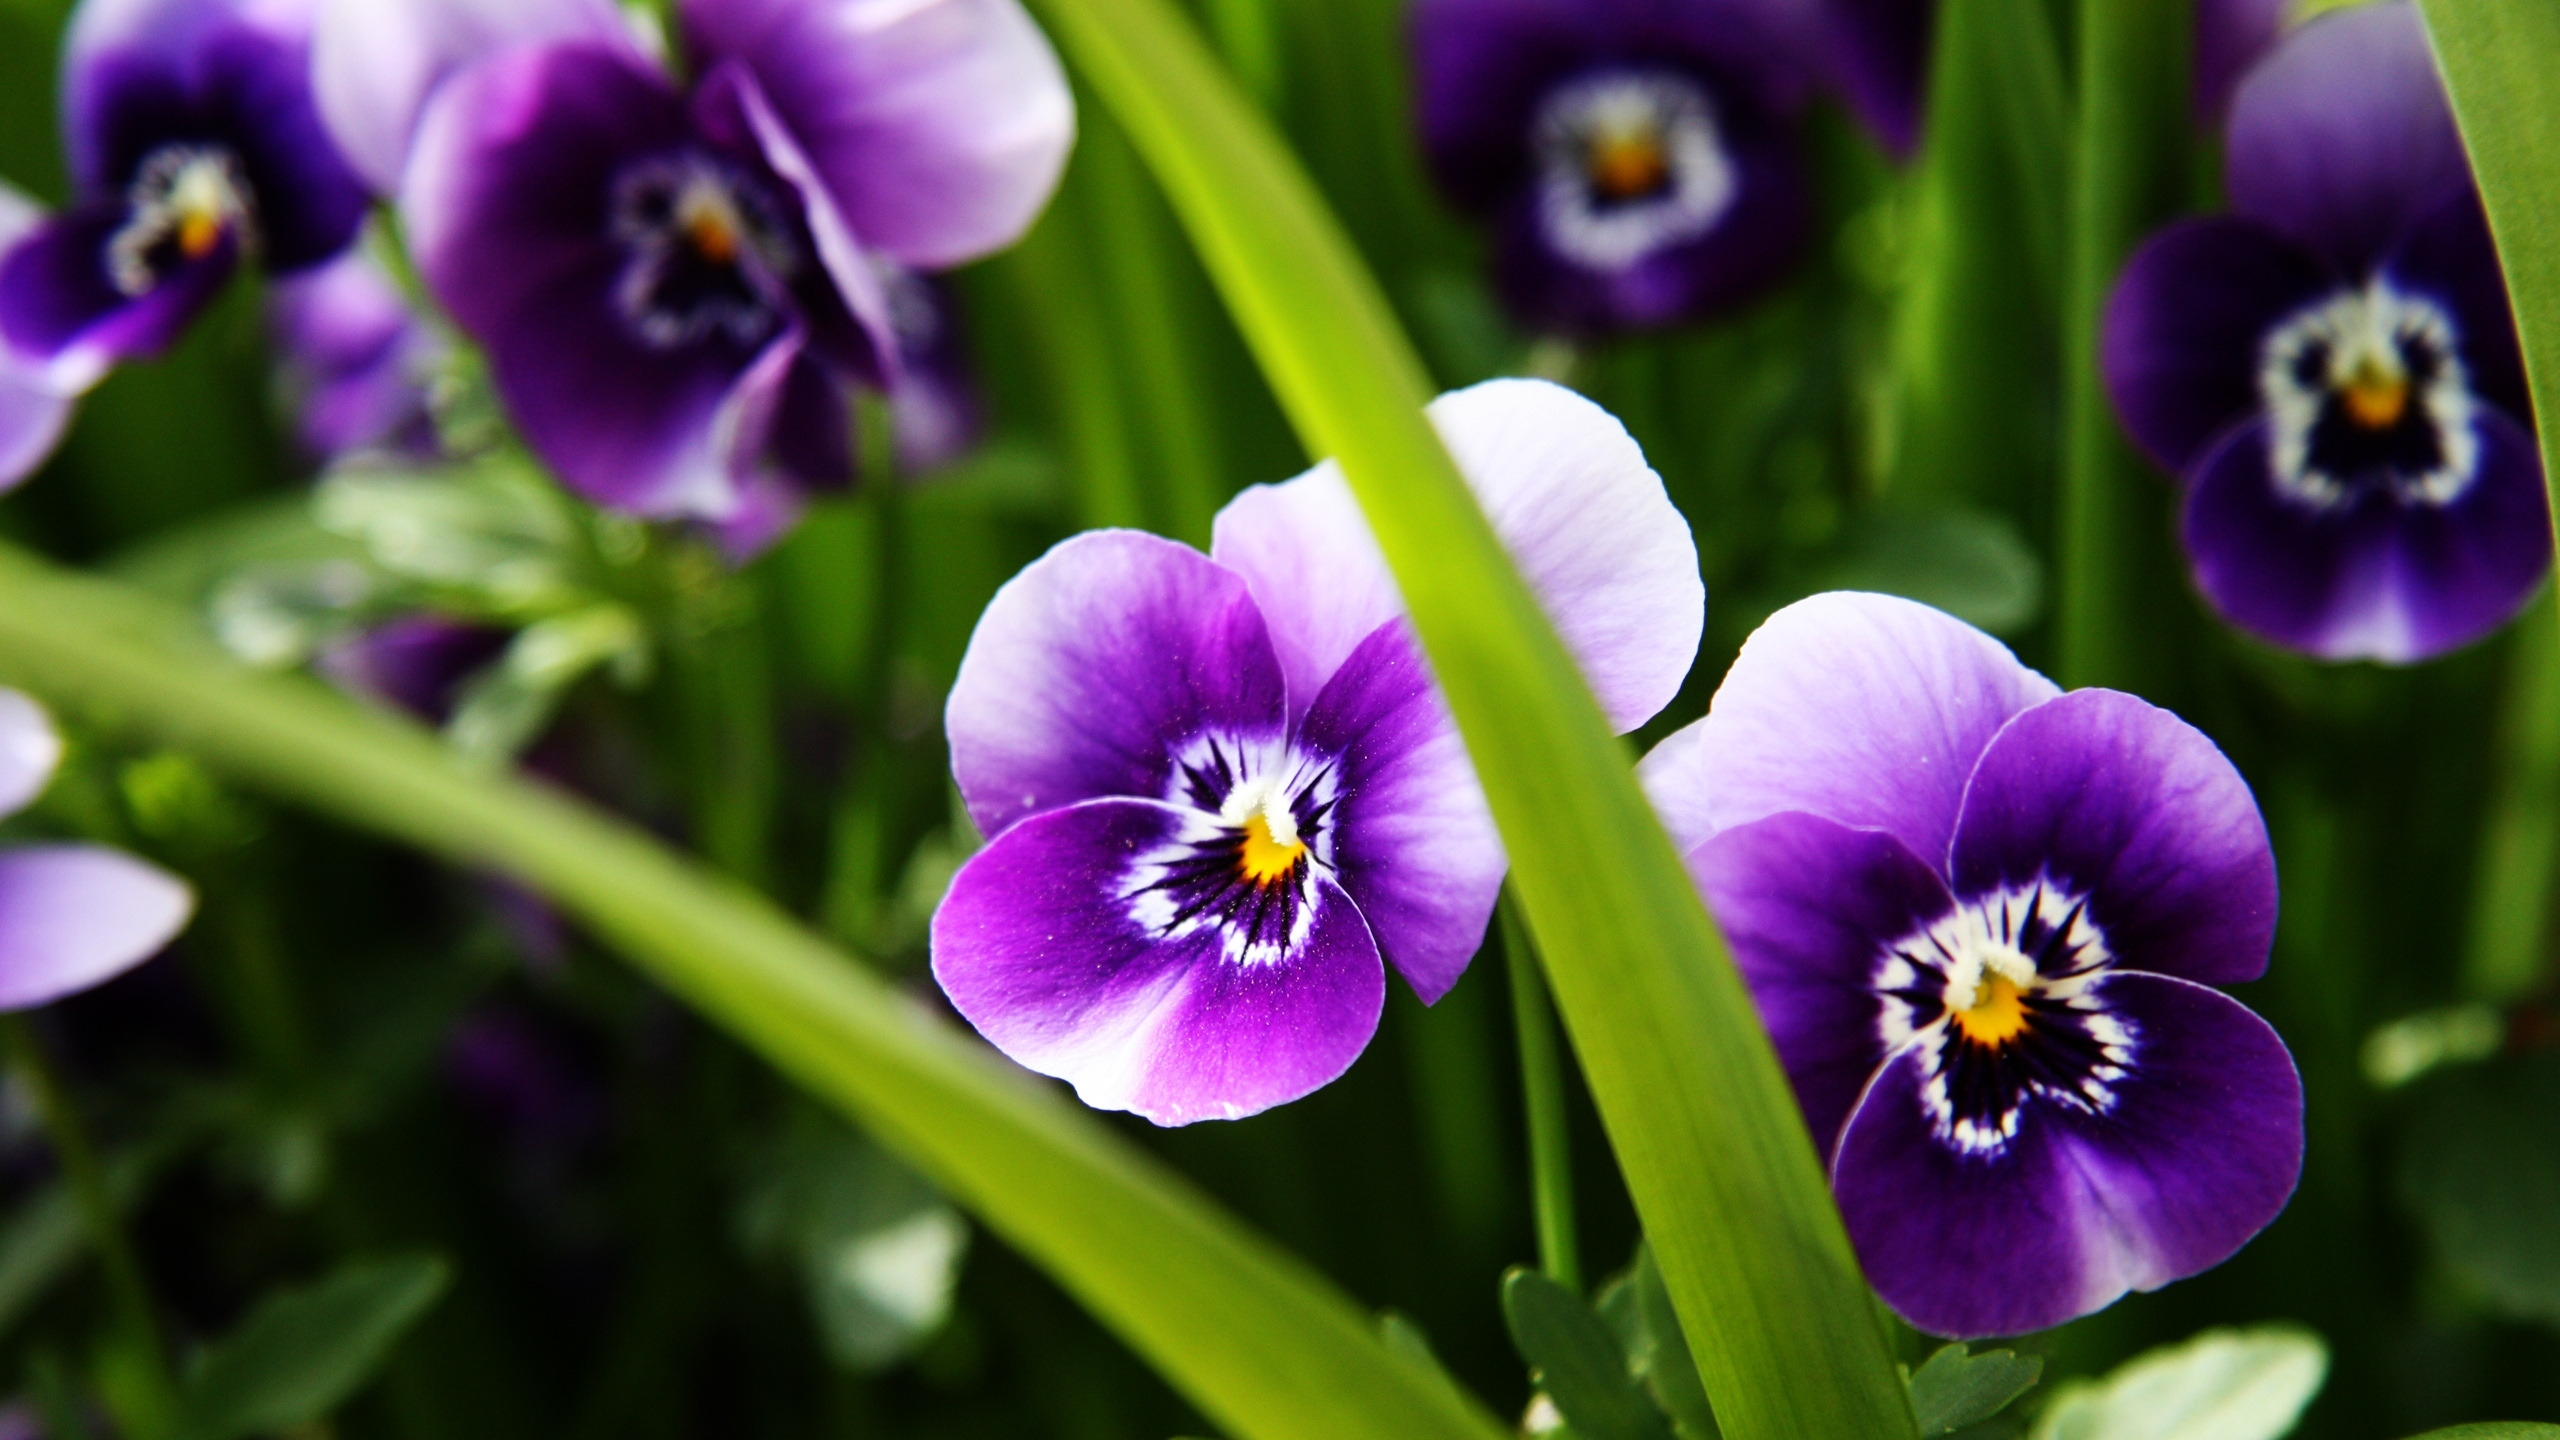 Purple Pansies for 2560x1440 HDTV resolution